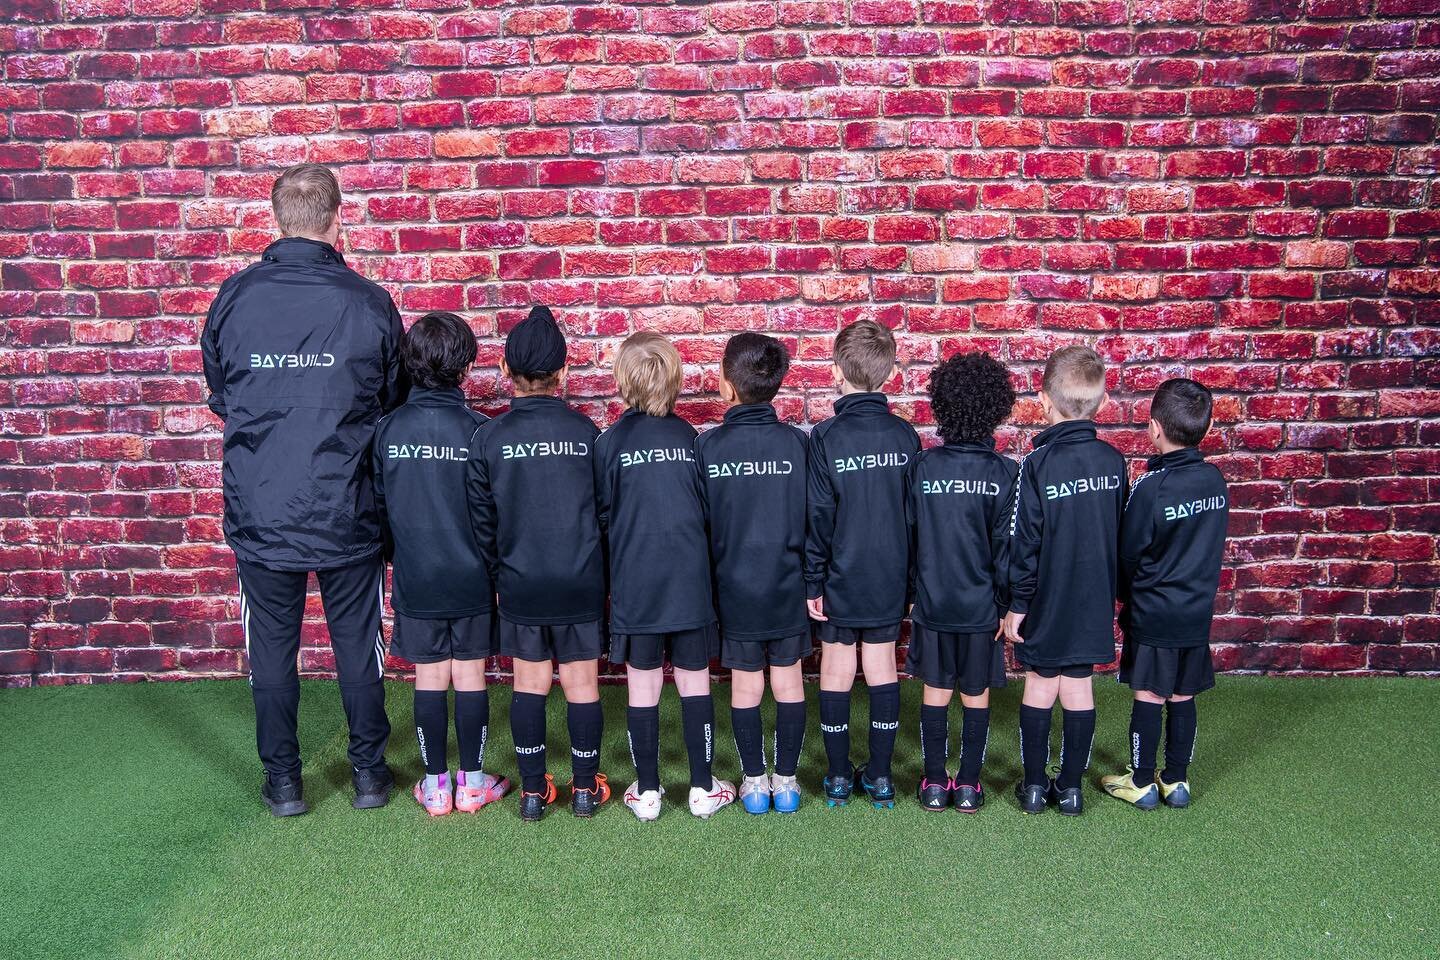 🌟 Baybuild is proud to sponsor the Oran Park Rovers. 🎉⚽ We're thrilled to support these talented young athletes as they embark on their journey in the beautiful game. 💪👊 @oranparkroversfc #Baybuild #OranParkRovers #YouthSoccer